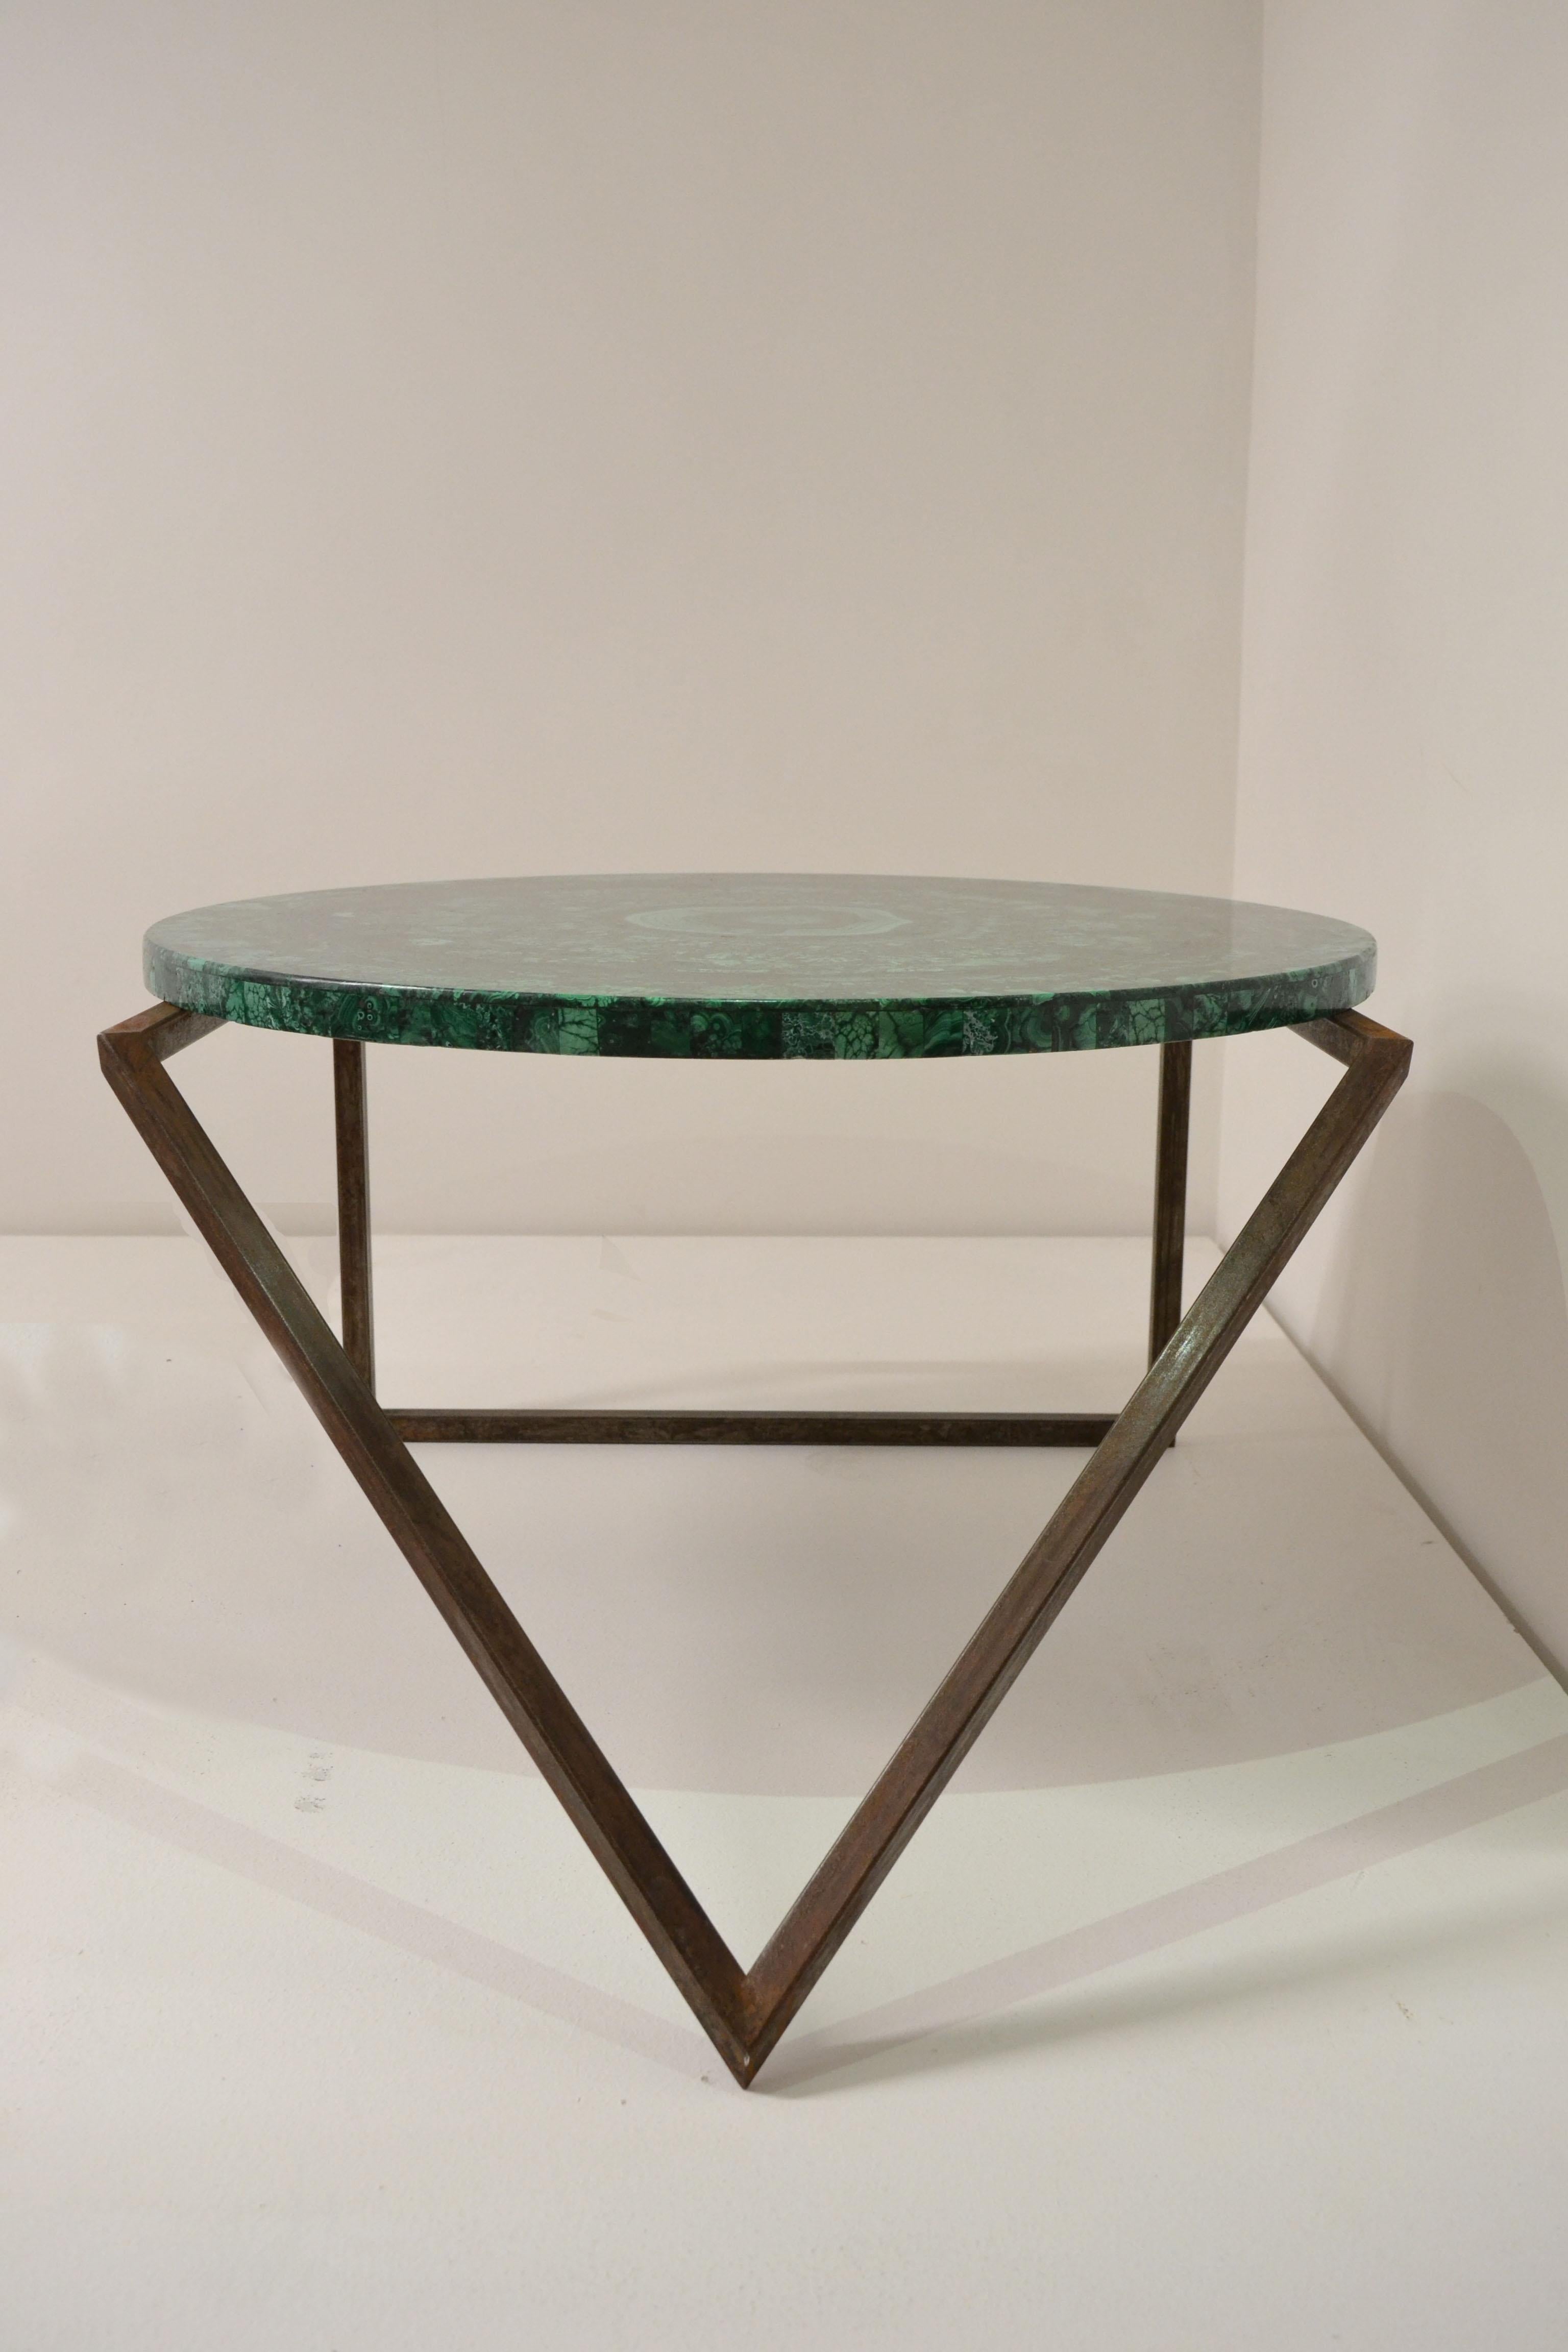 'Gems in the Air' is an refreshing piece in every regard. 

From the beautiful Malachite top piece - natural art in its own right - to the amazingly sculptural legs, 'Gems in the Air' is an all-round masterpiece of design that evokes a striking